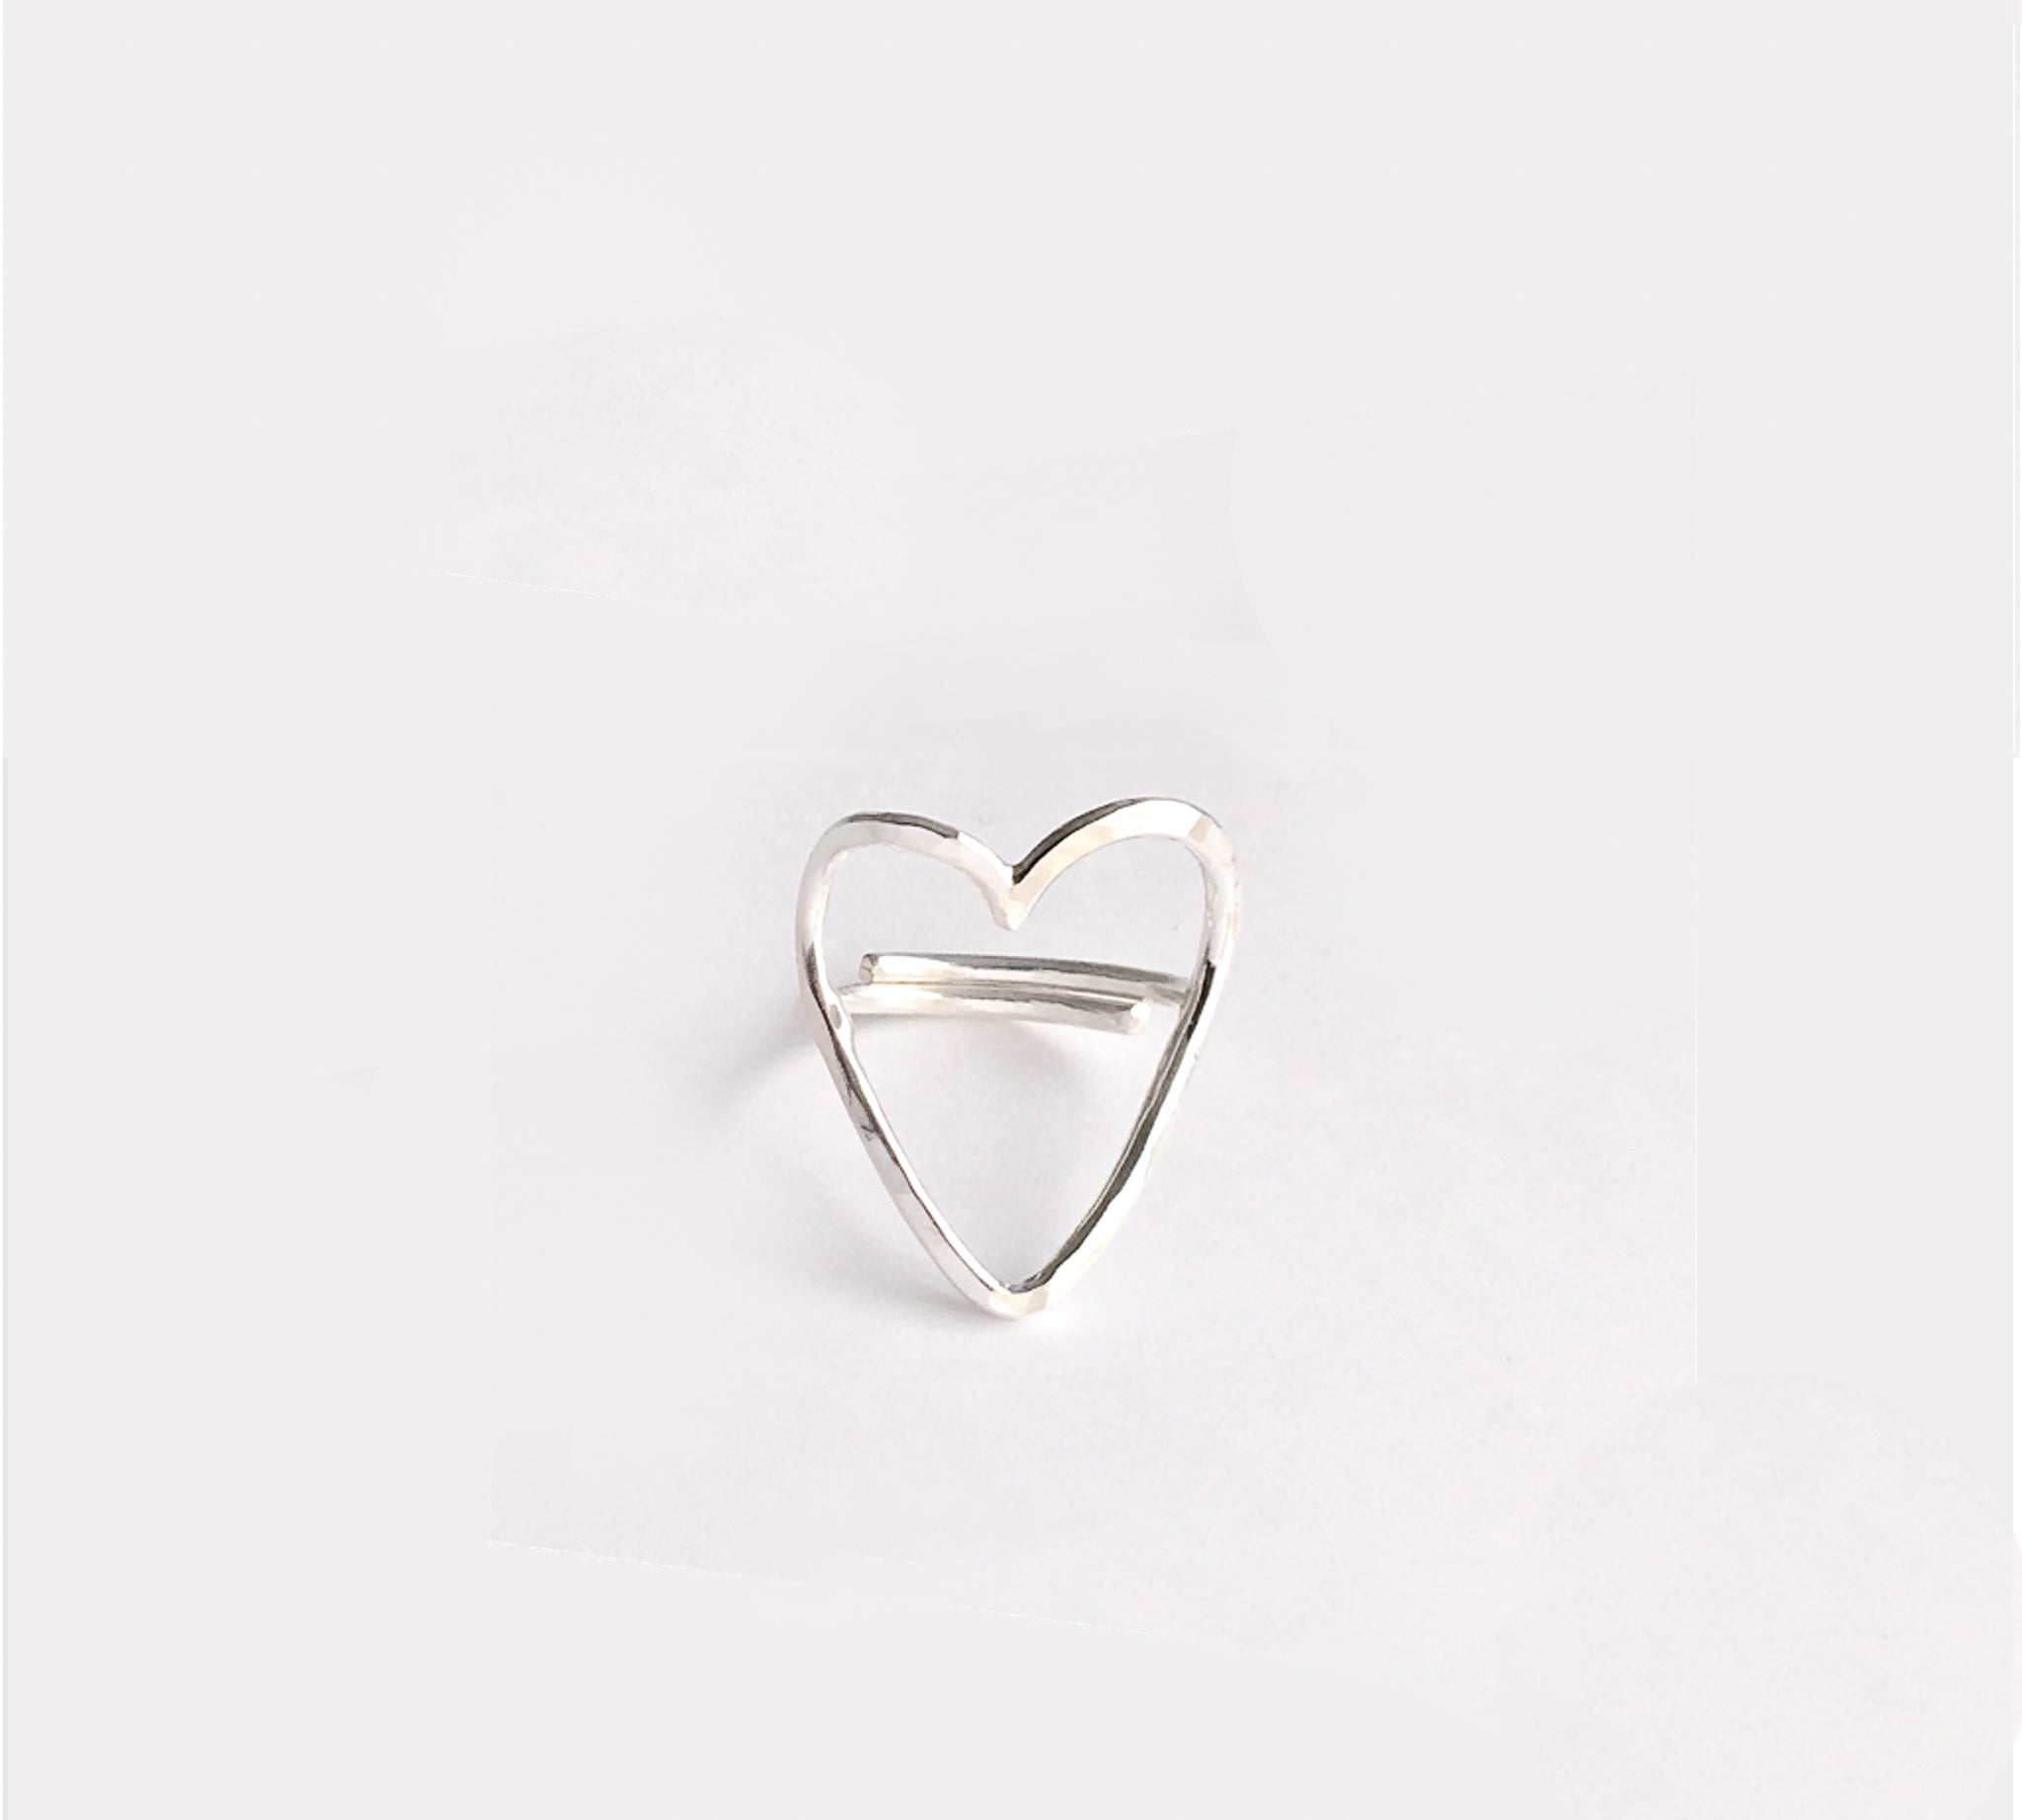 Silver Open Heart Ring, featured image